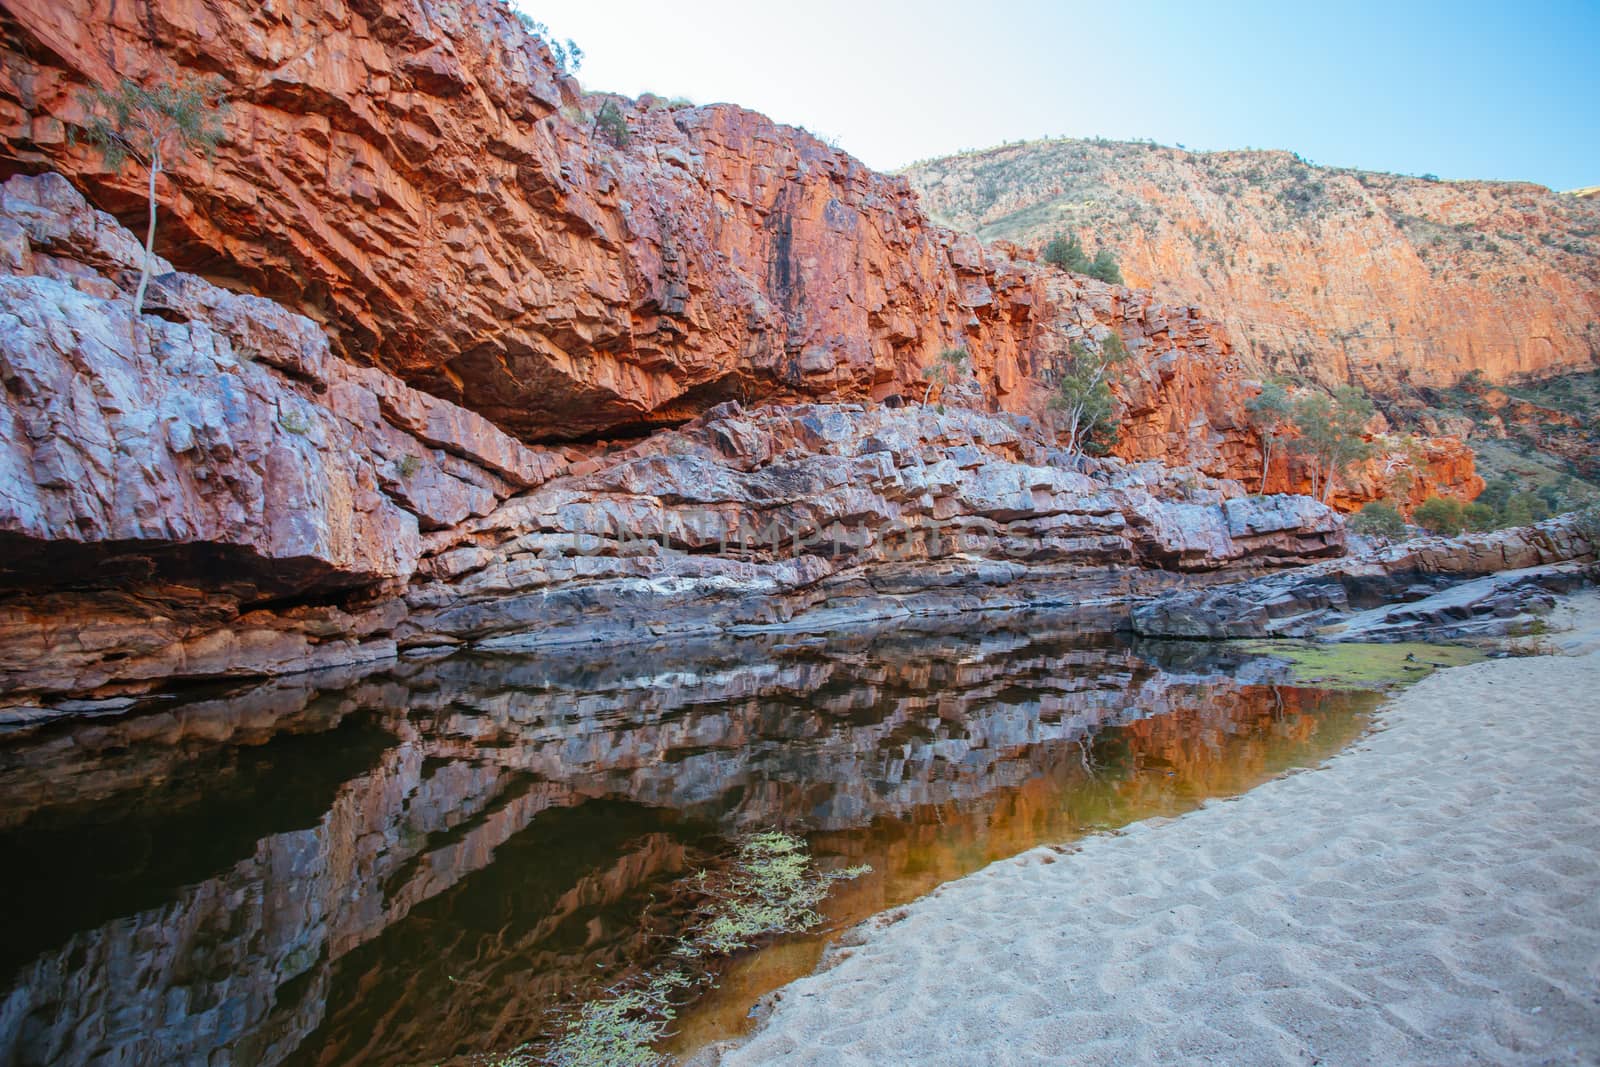 The impressive views of Ormiston Gorge in the West MacDonnell Ranges in Northern Territory, Australia